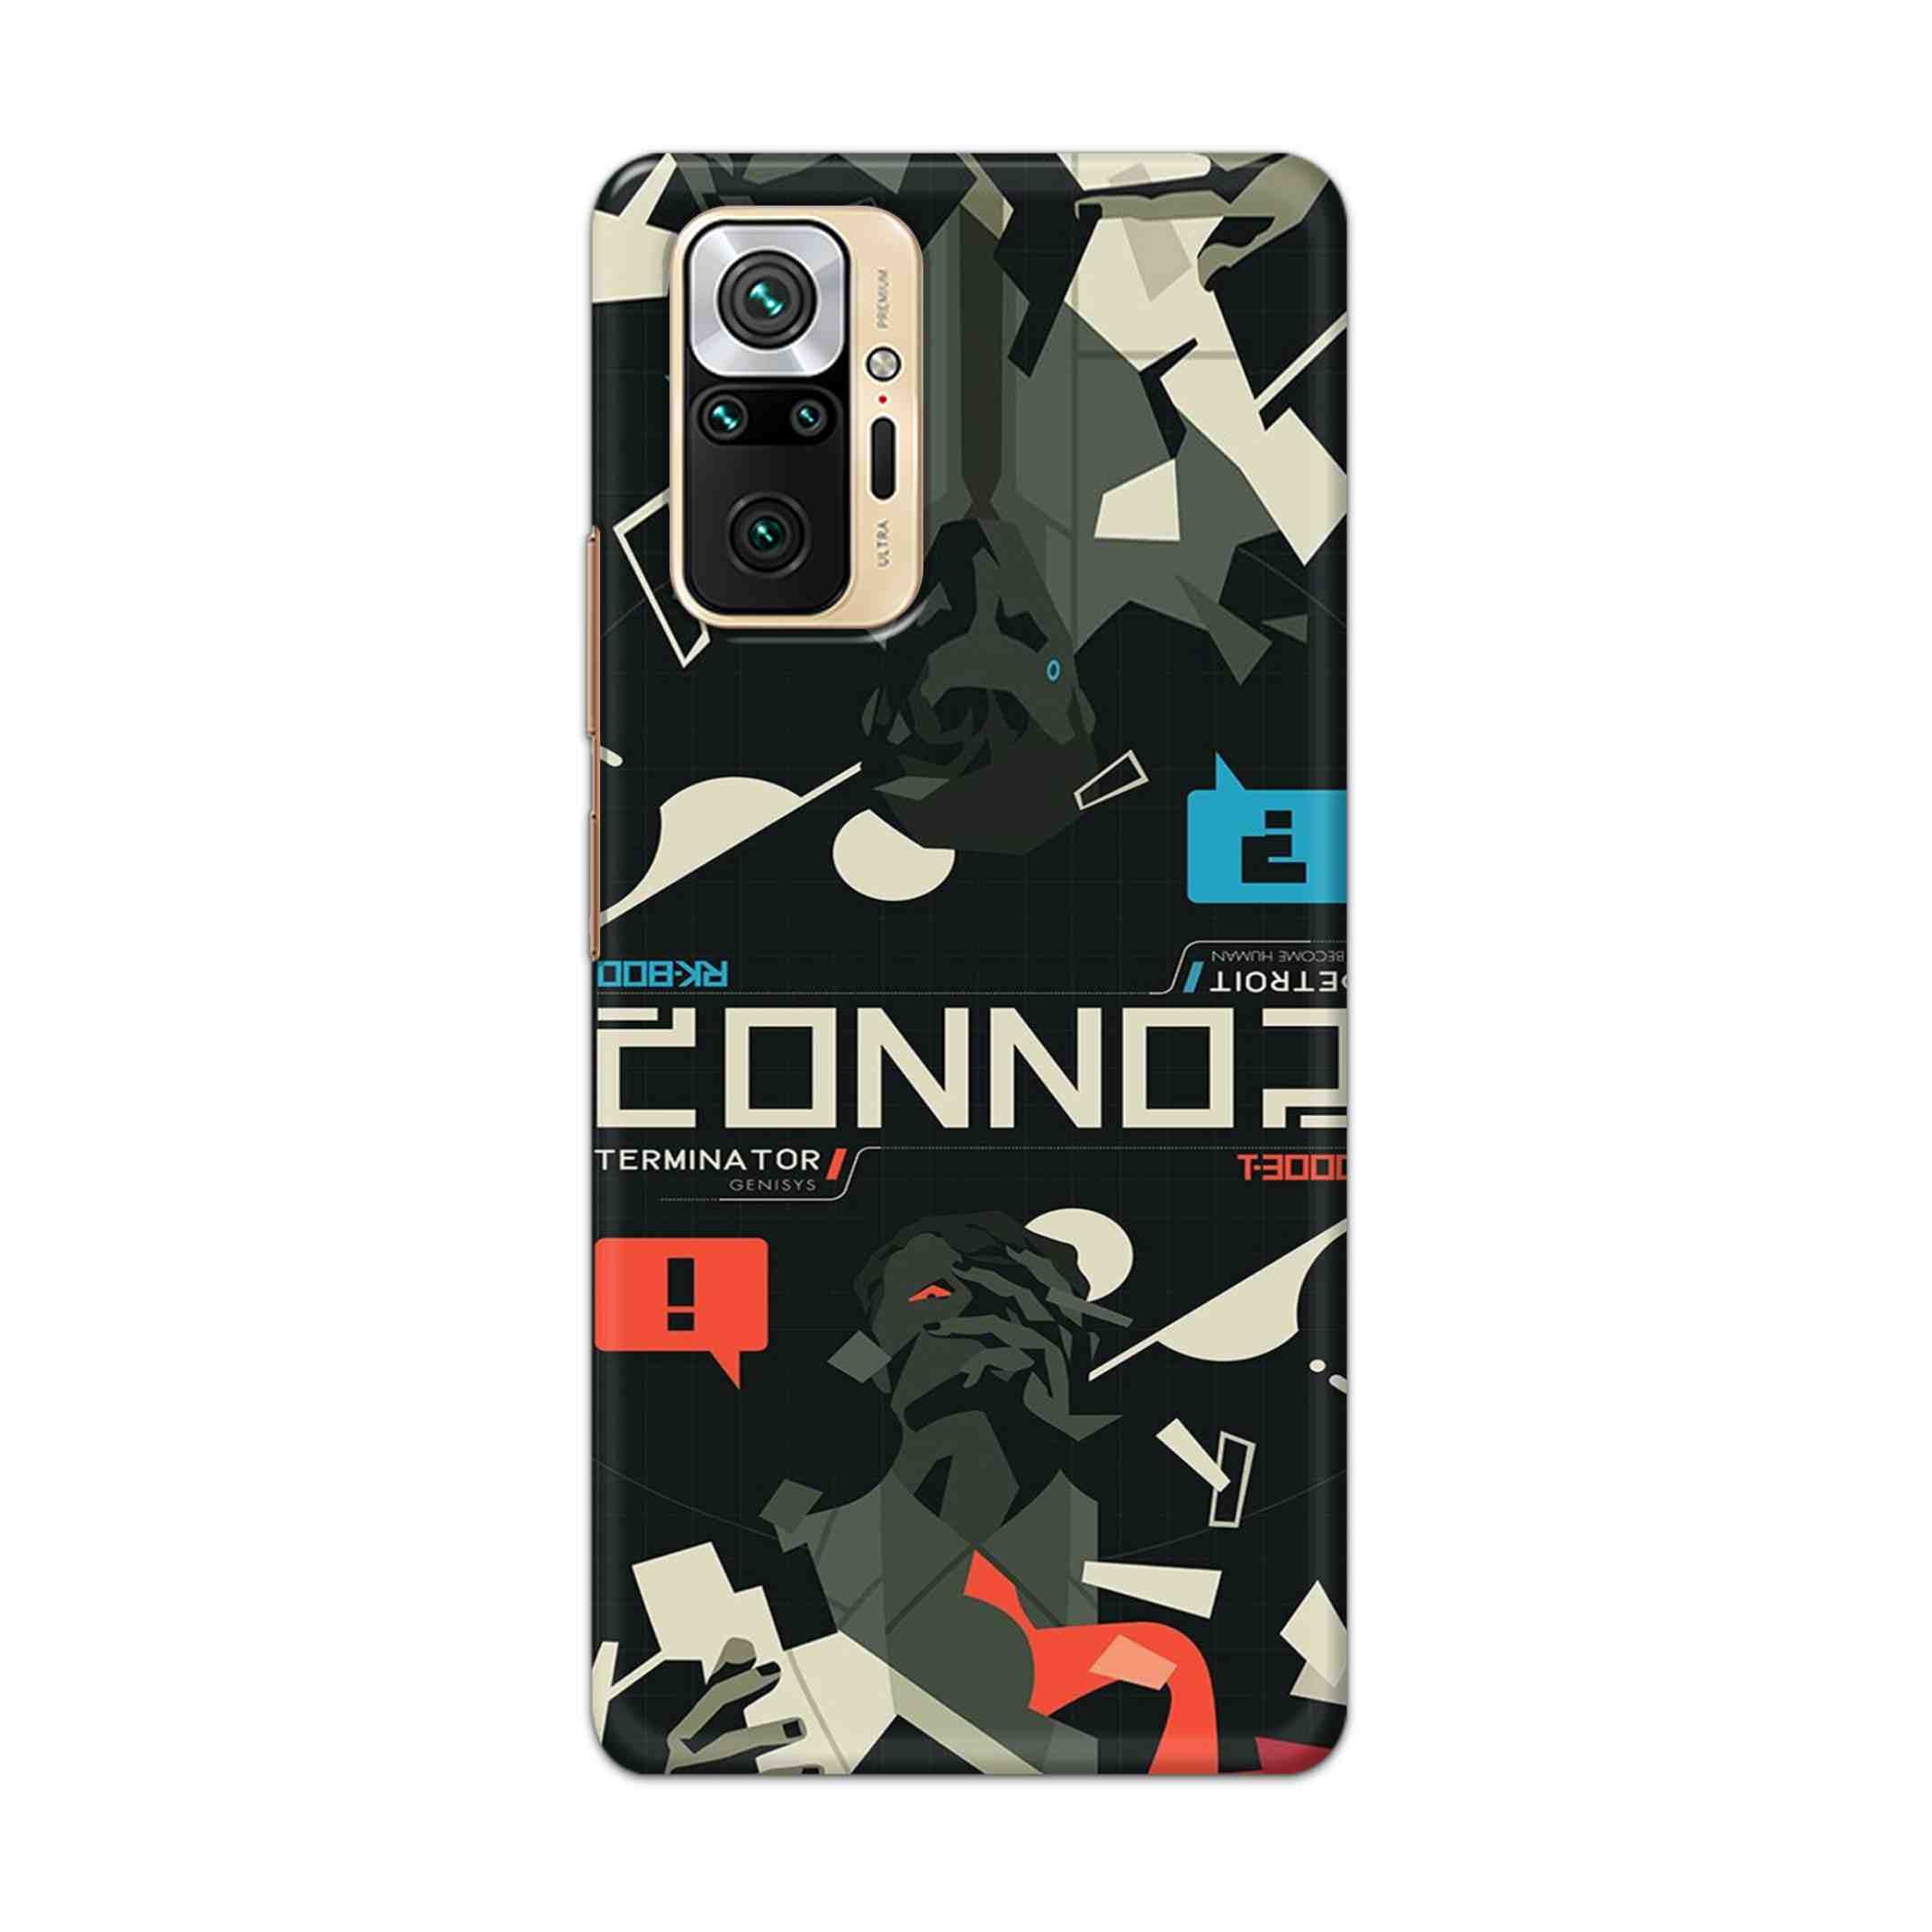 Buy Terminator Hard Back Mobile Phone Case Cover For Redmi Note 10 Pro Online